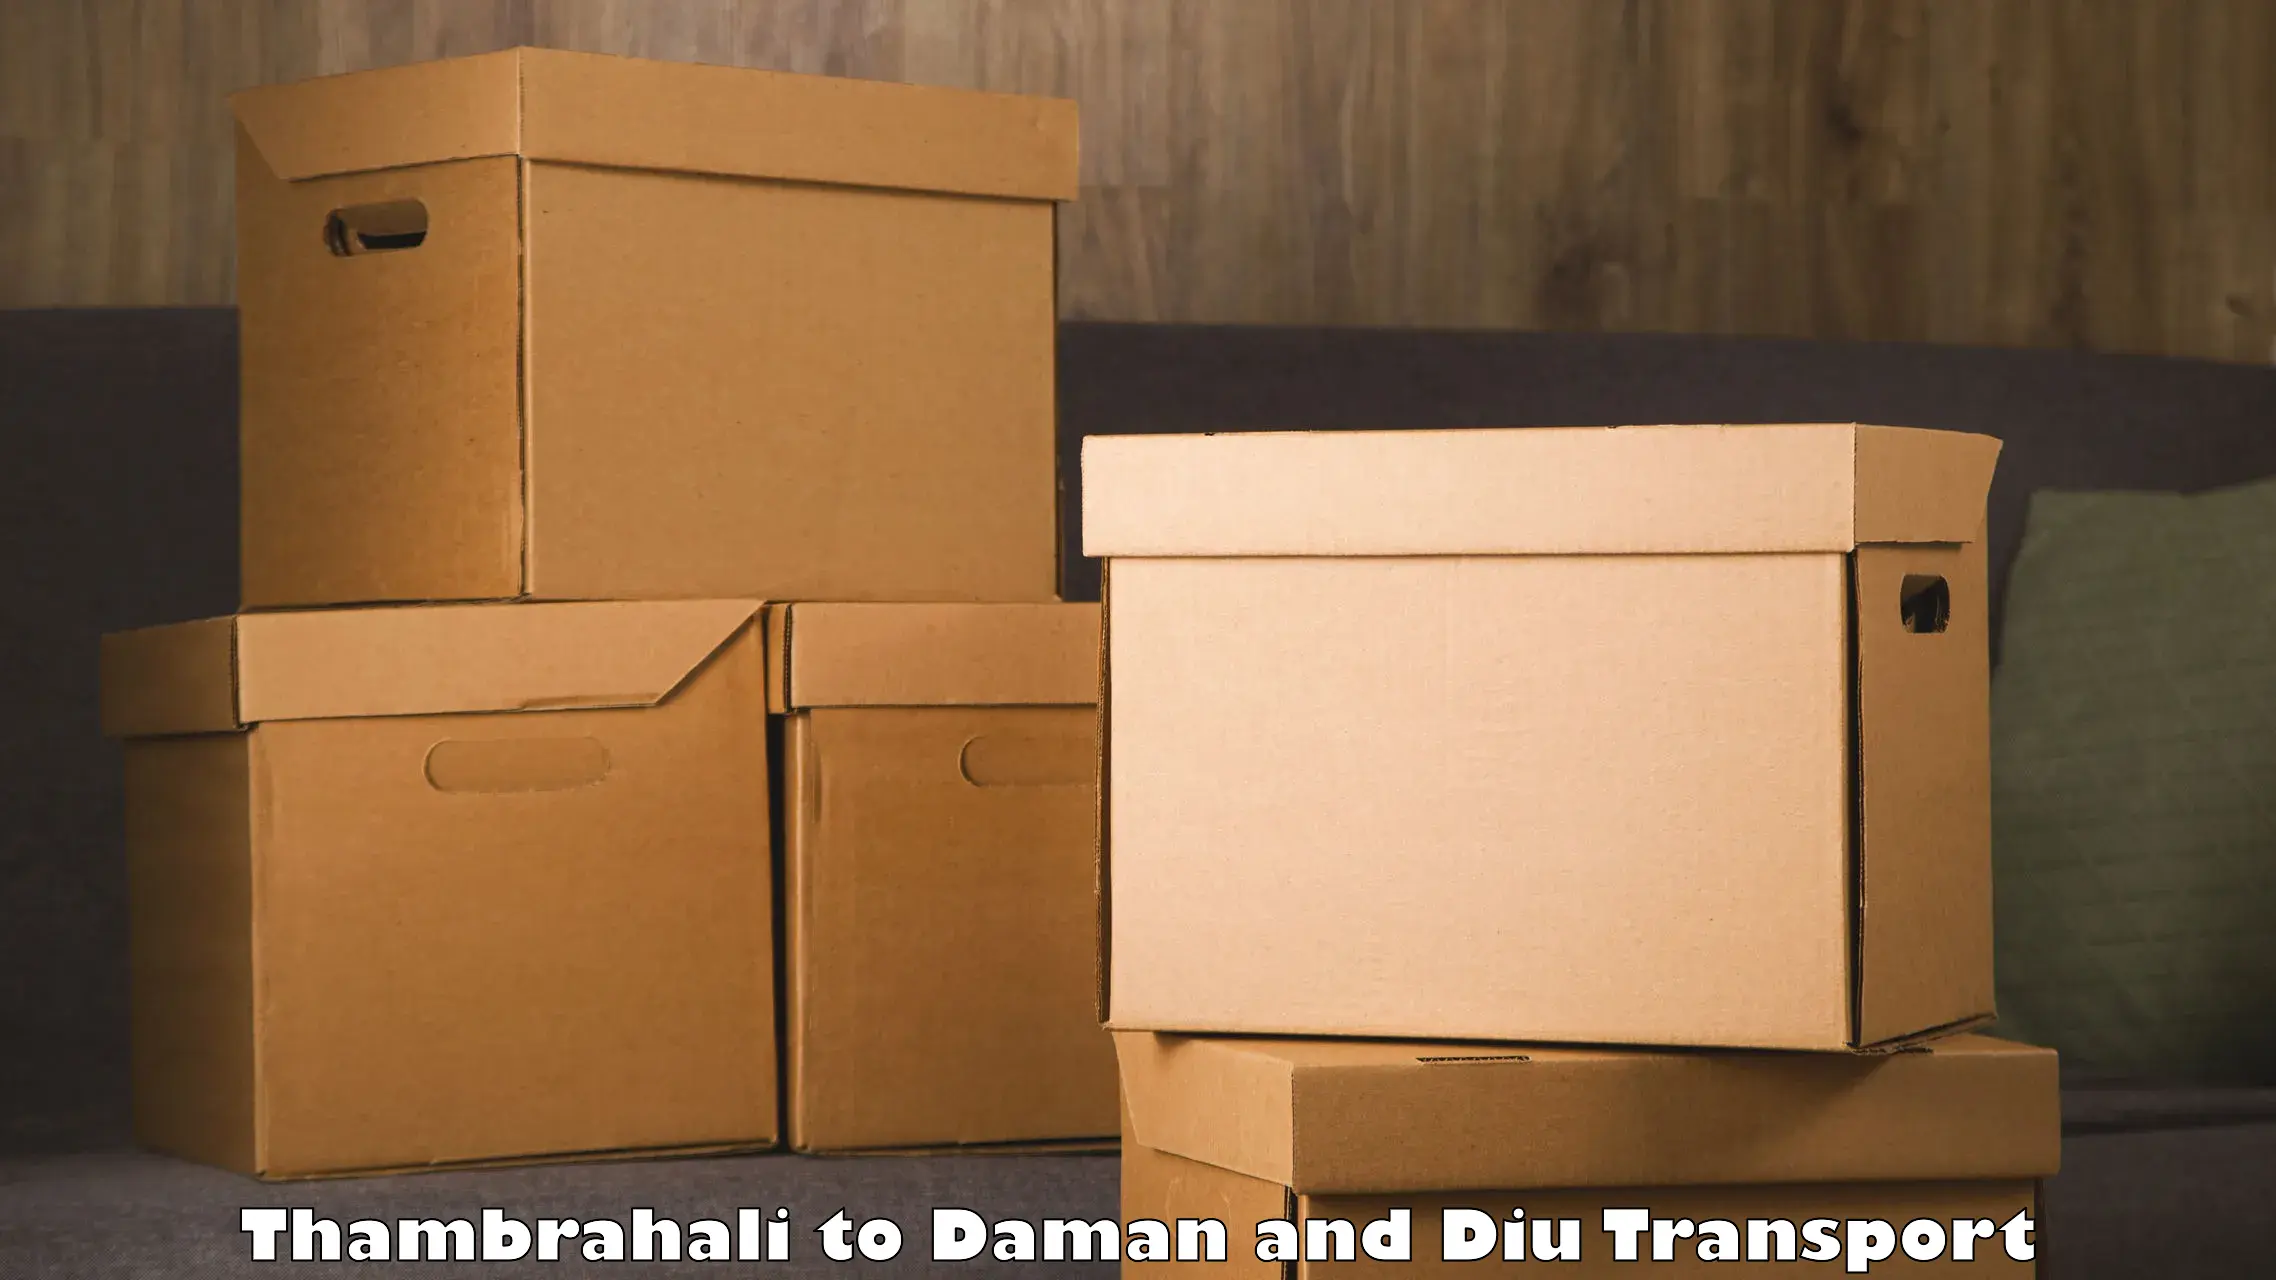 Nearby transport service Thambrahali to Daman and Diu